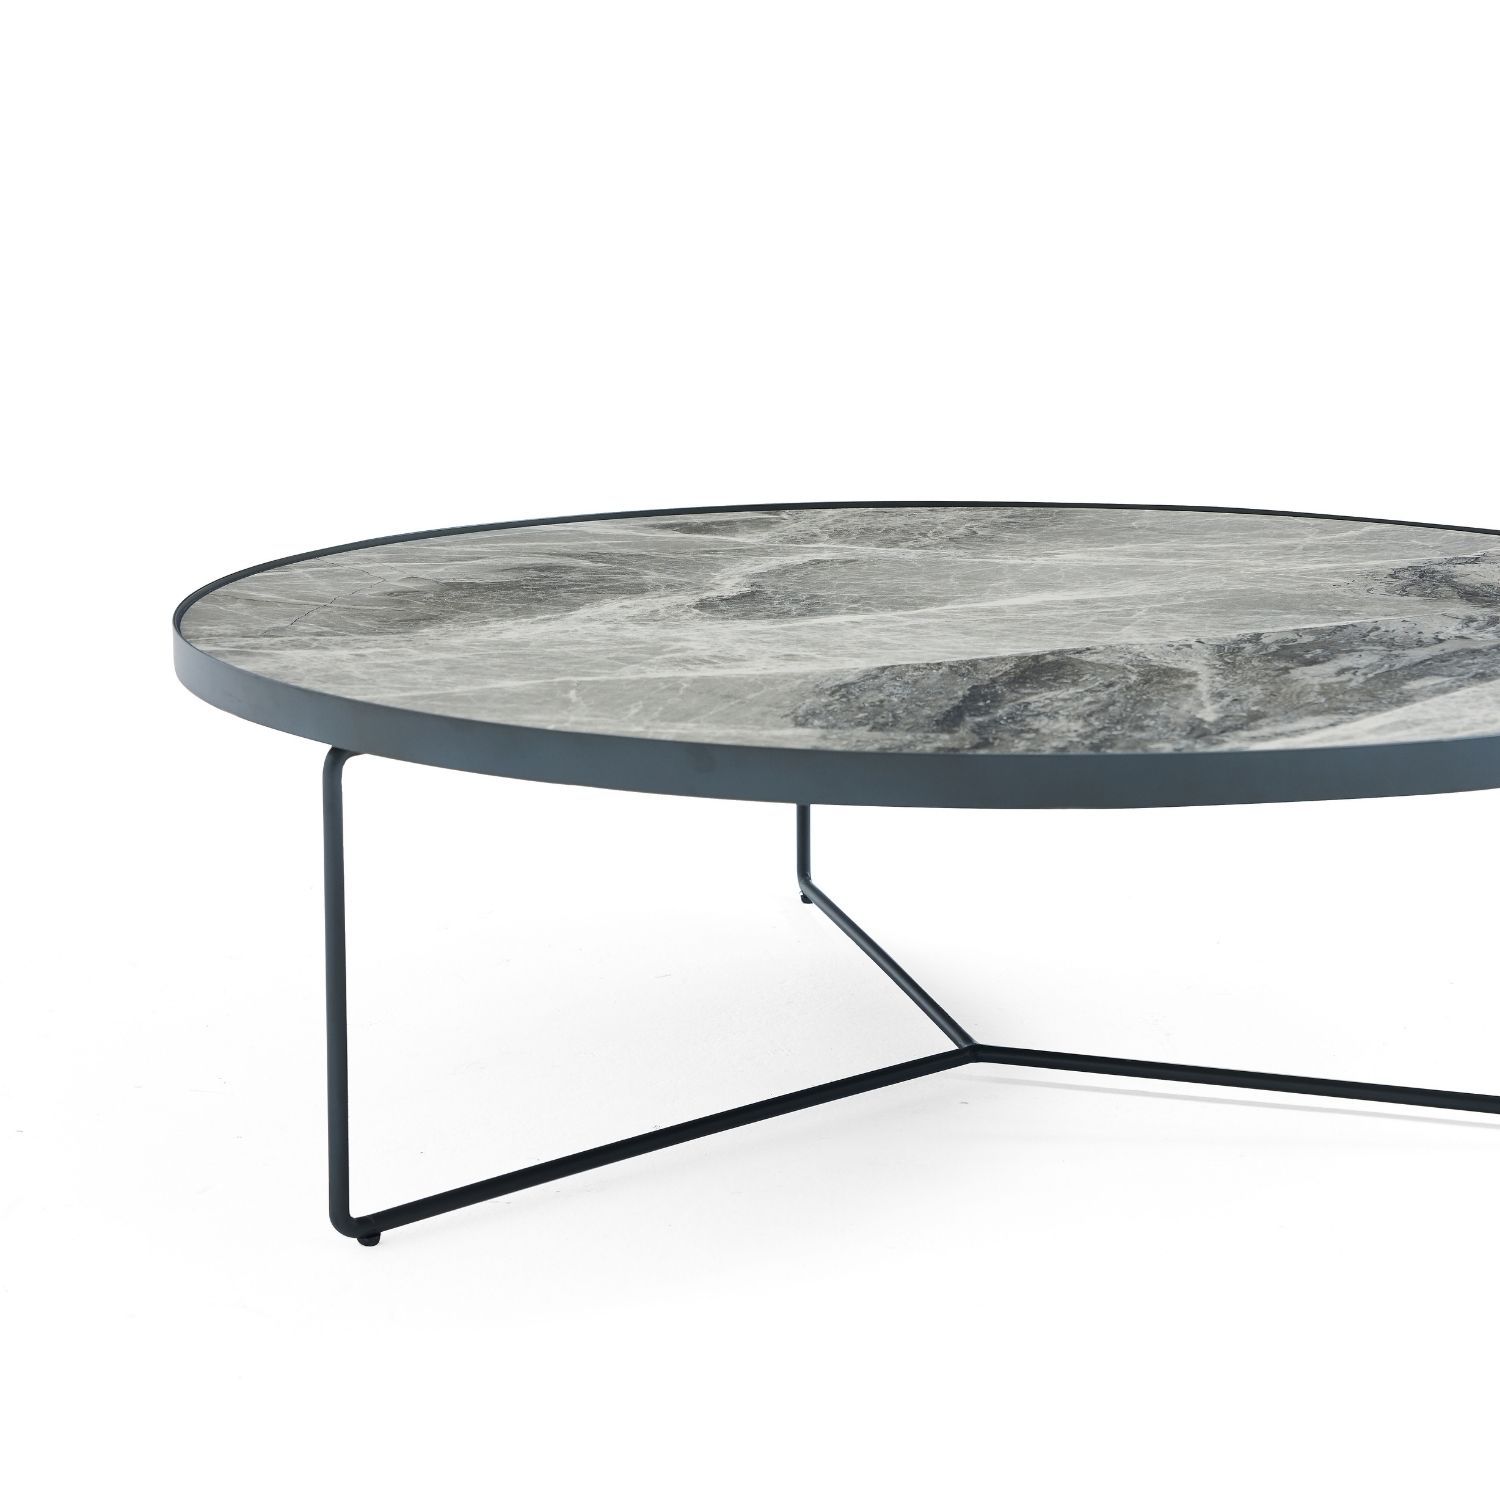 Strata Table Coffee Table Foundry 